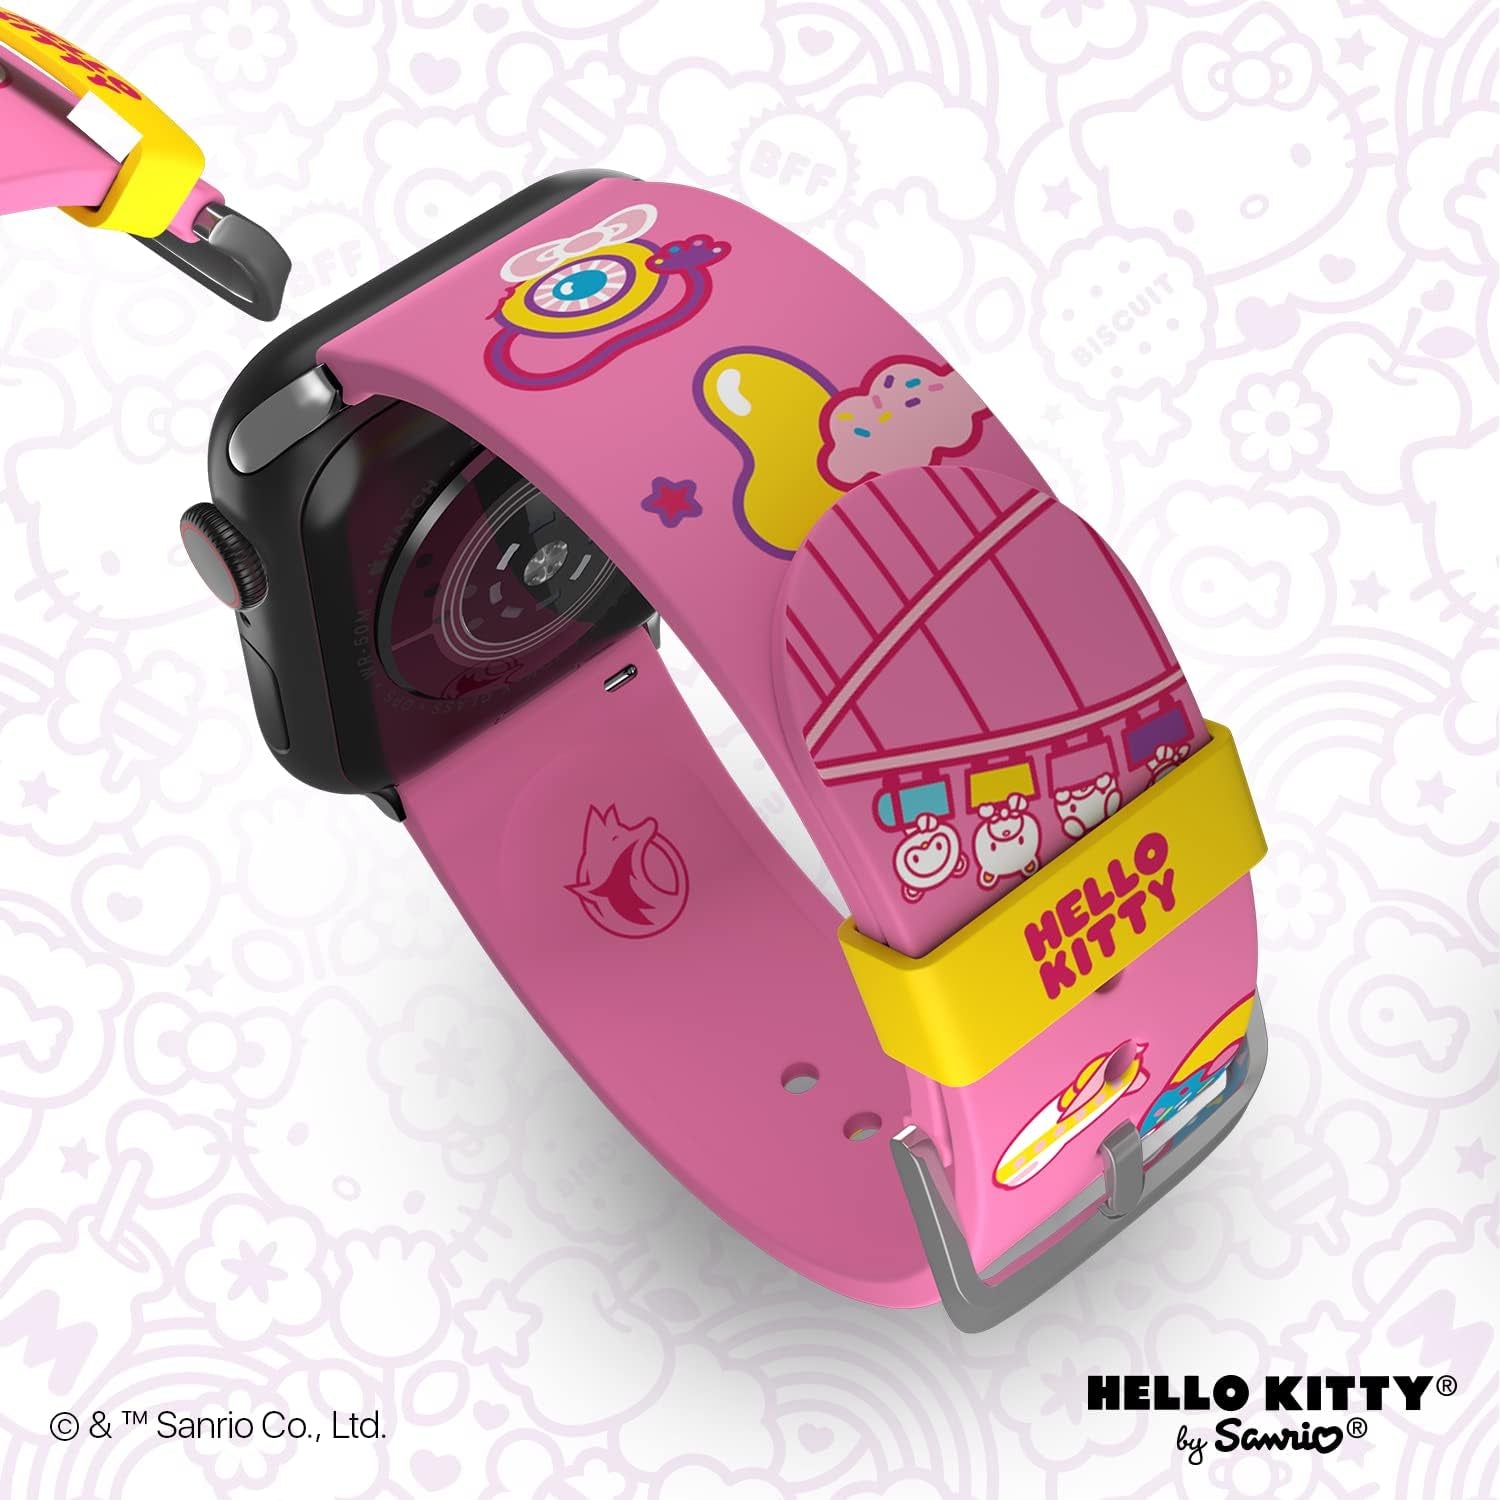 Hello Kitty Smartwatch Band - Officially Licensed, Compatible with Apple Watch (Not Included)